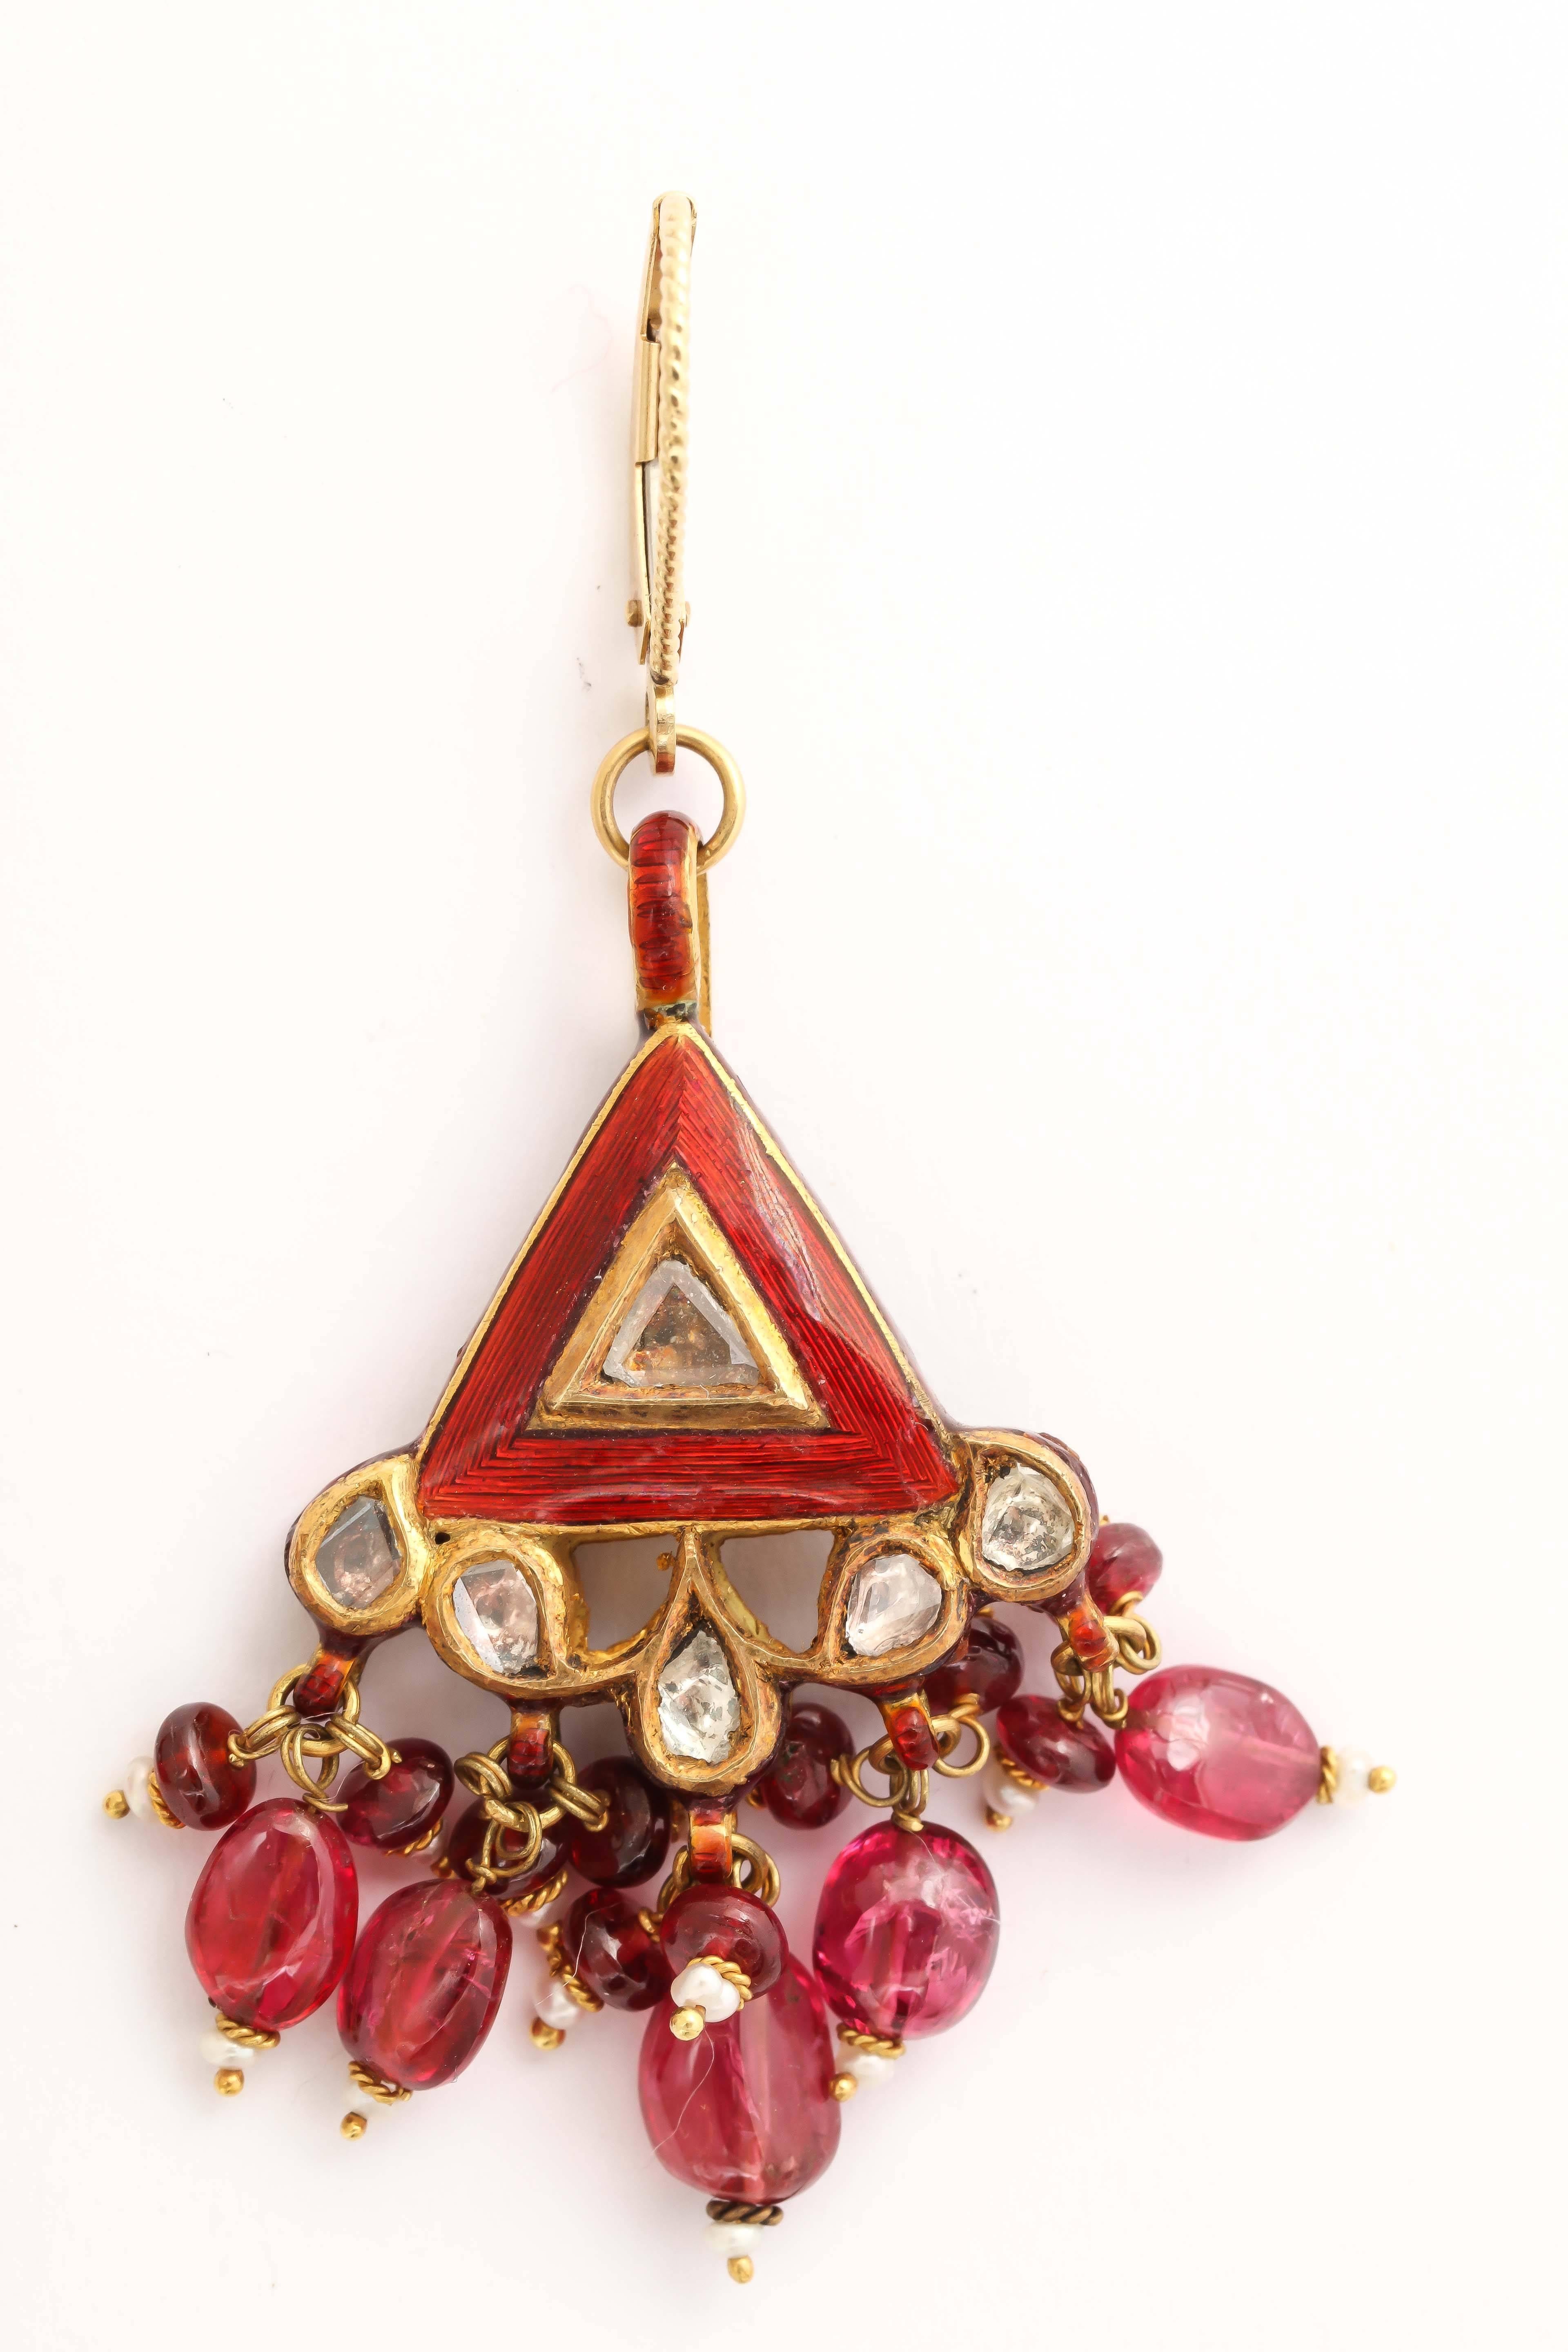 These exquisite red enamel earrings are festooned  with ruby, red spinel and pearl dangles. In the center of the red enamel is an Indian diamond, they're called polki. They are flat slices of diamonds and the others are rose cut diamonds. The back